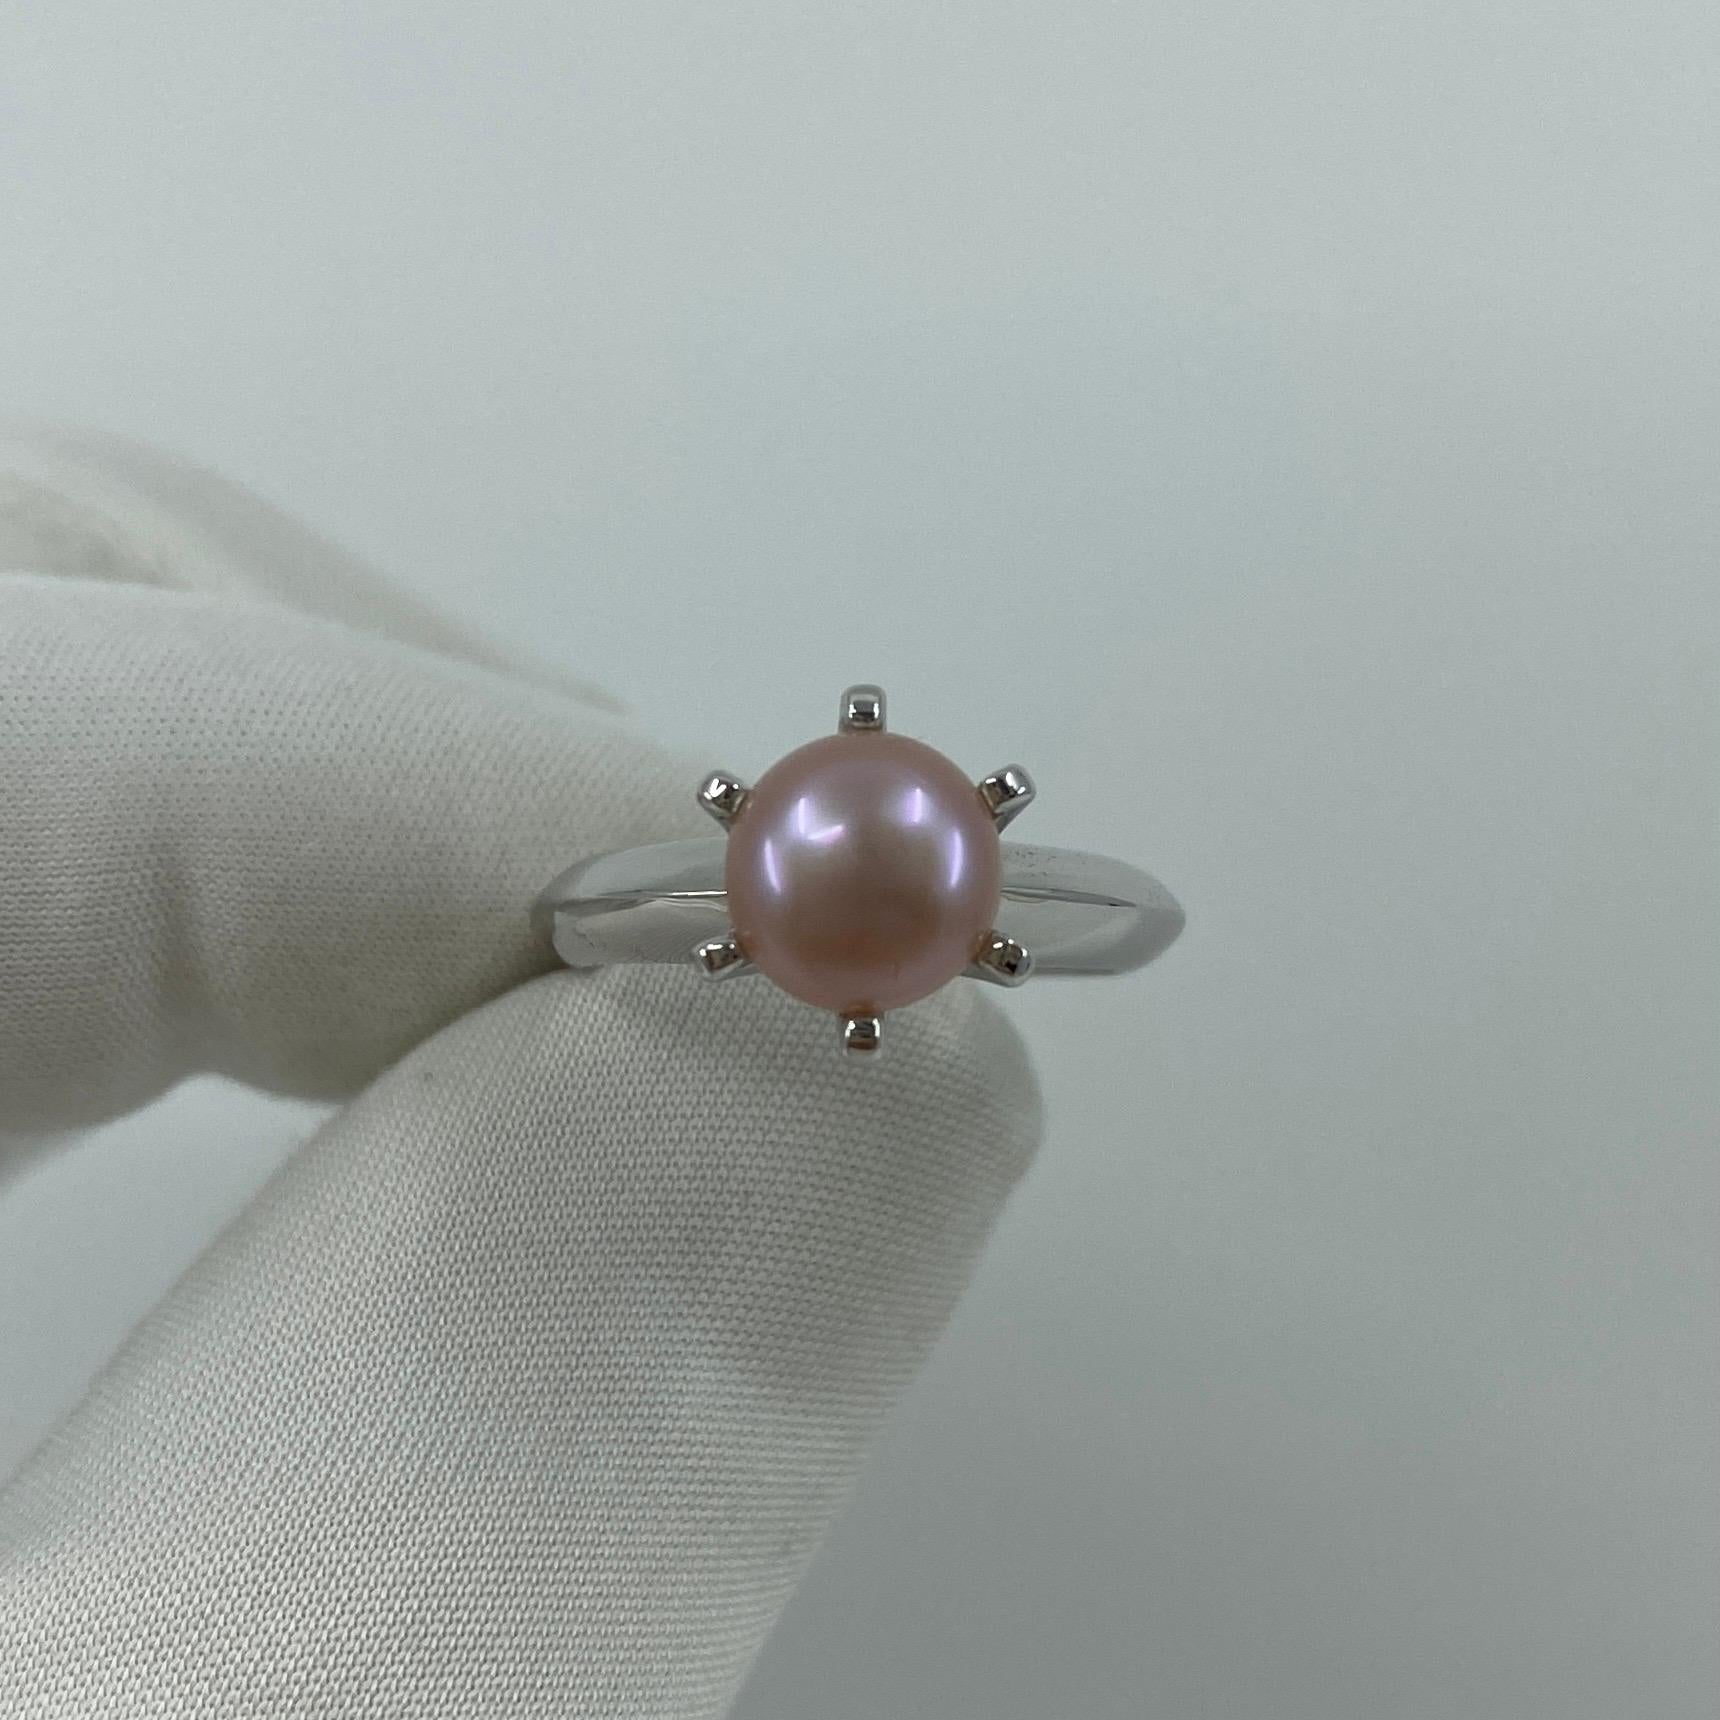 Freshwater Pink Pearl Silver Solitaire Ring.

Fine 7.7mm cultured pink pearl set in a beautiful 6 prong sterling silver solitaire ring. Excellent polish on the ring and the pearl is also excellent quality in top condition.

Ring size M. The ring is